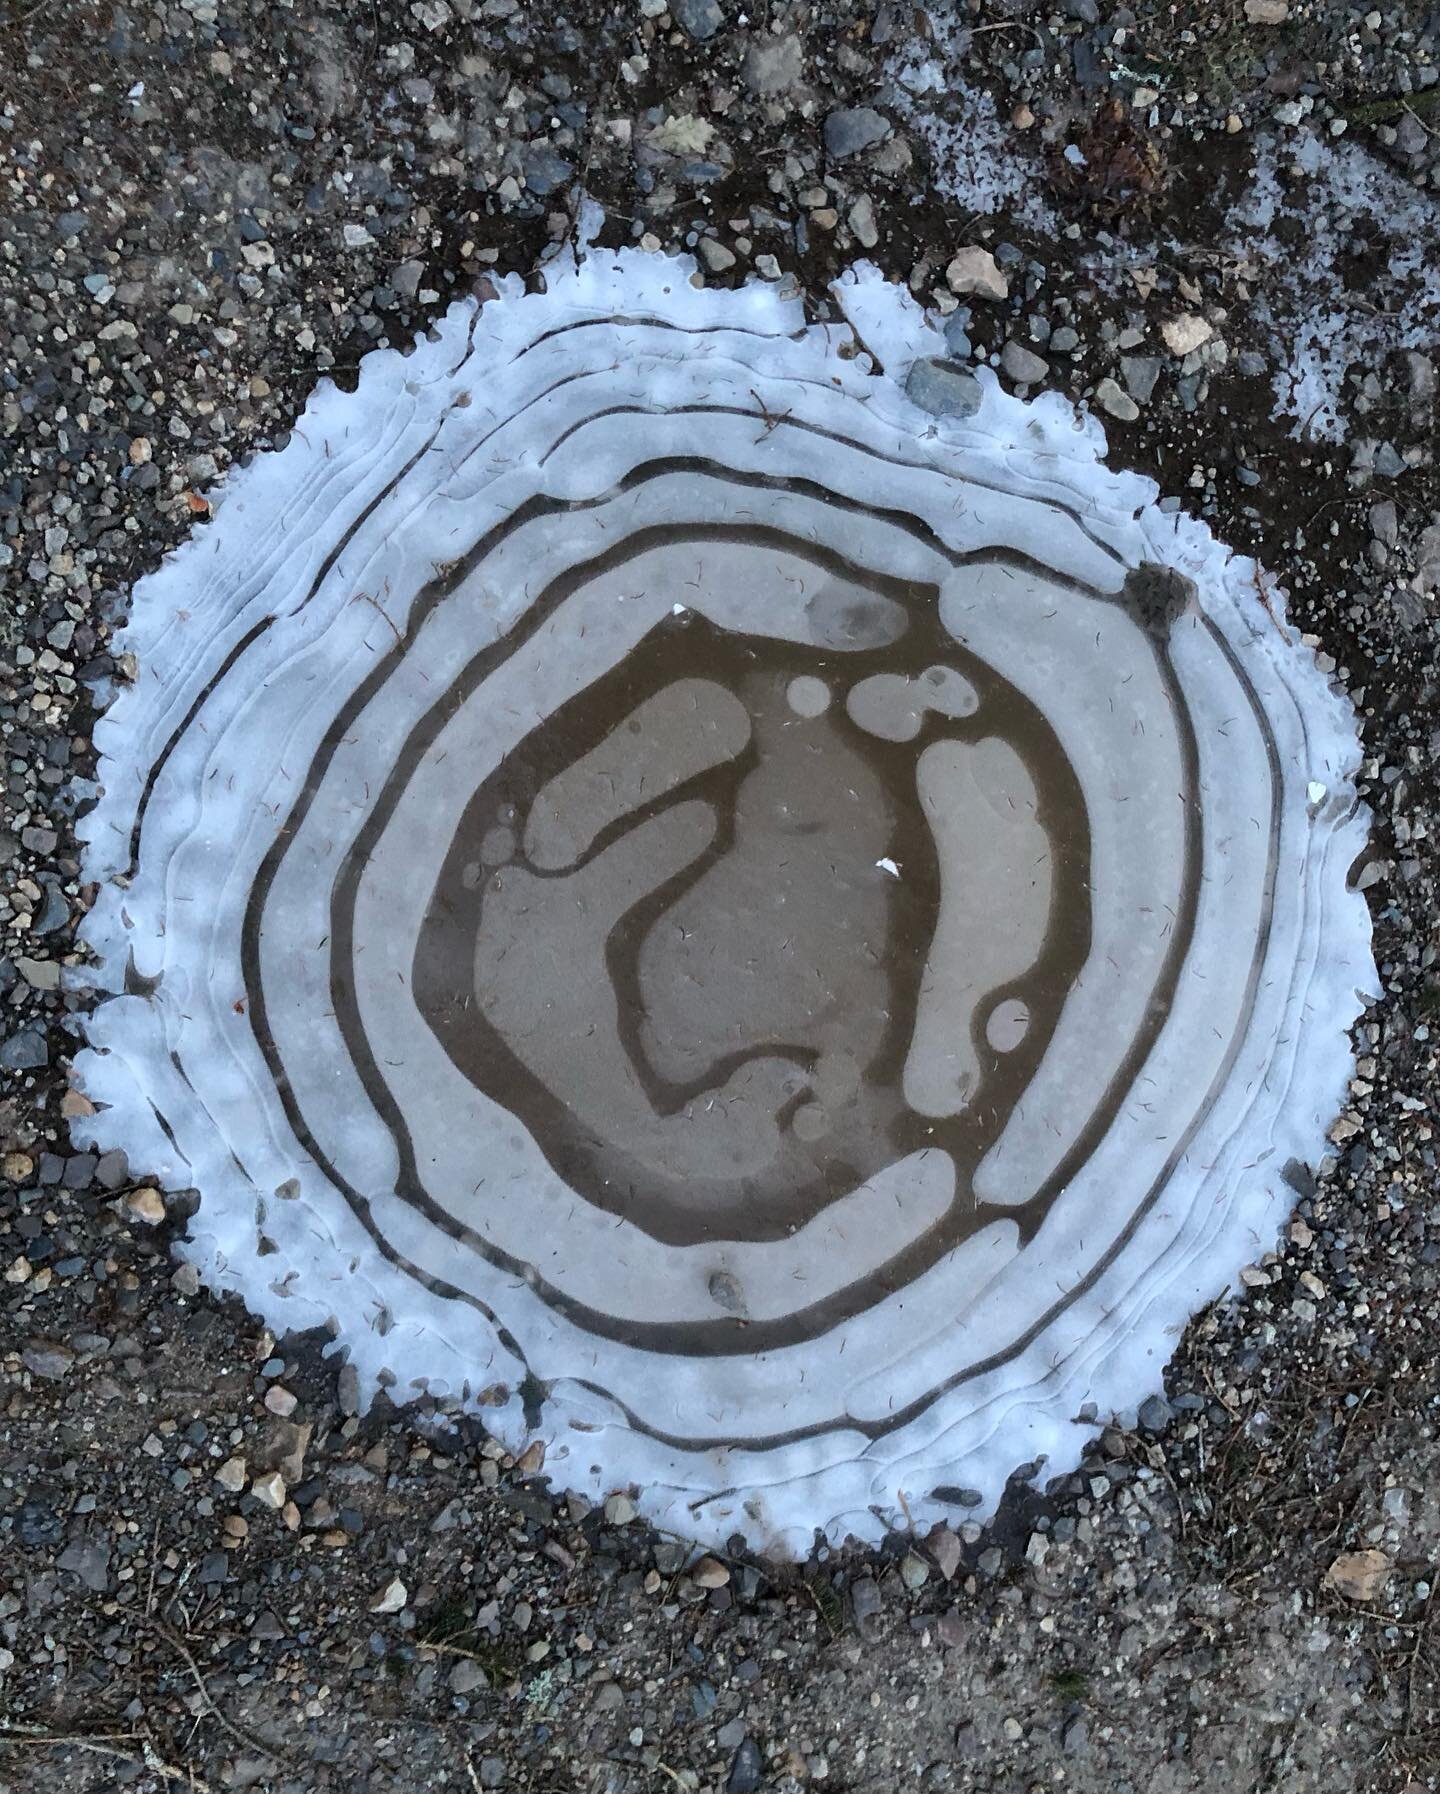 Time for another reminder that art is everywhere&hellip;these are simply frozen, muddy puddles in lovely driveway potholes. And for all you cell geeks out there, do these not remind you of a Golgi apparatus?!!